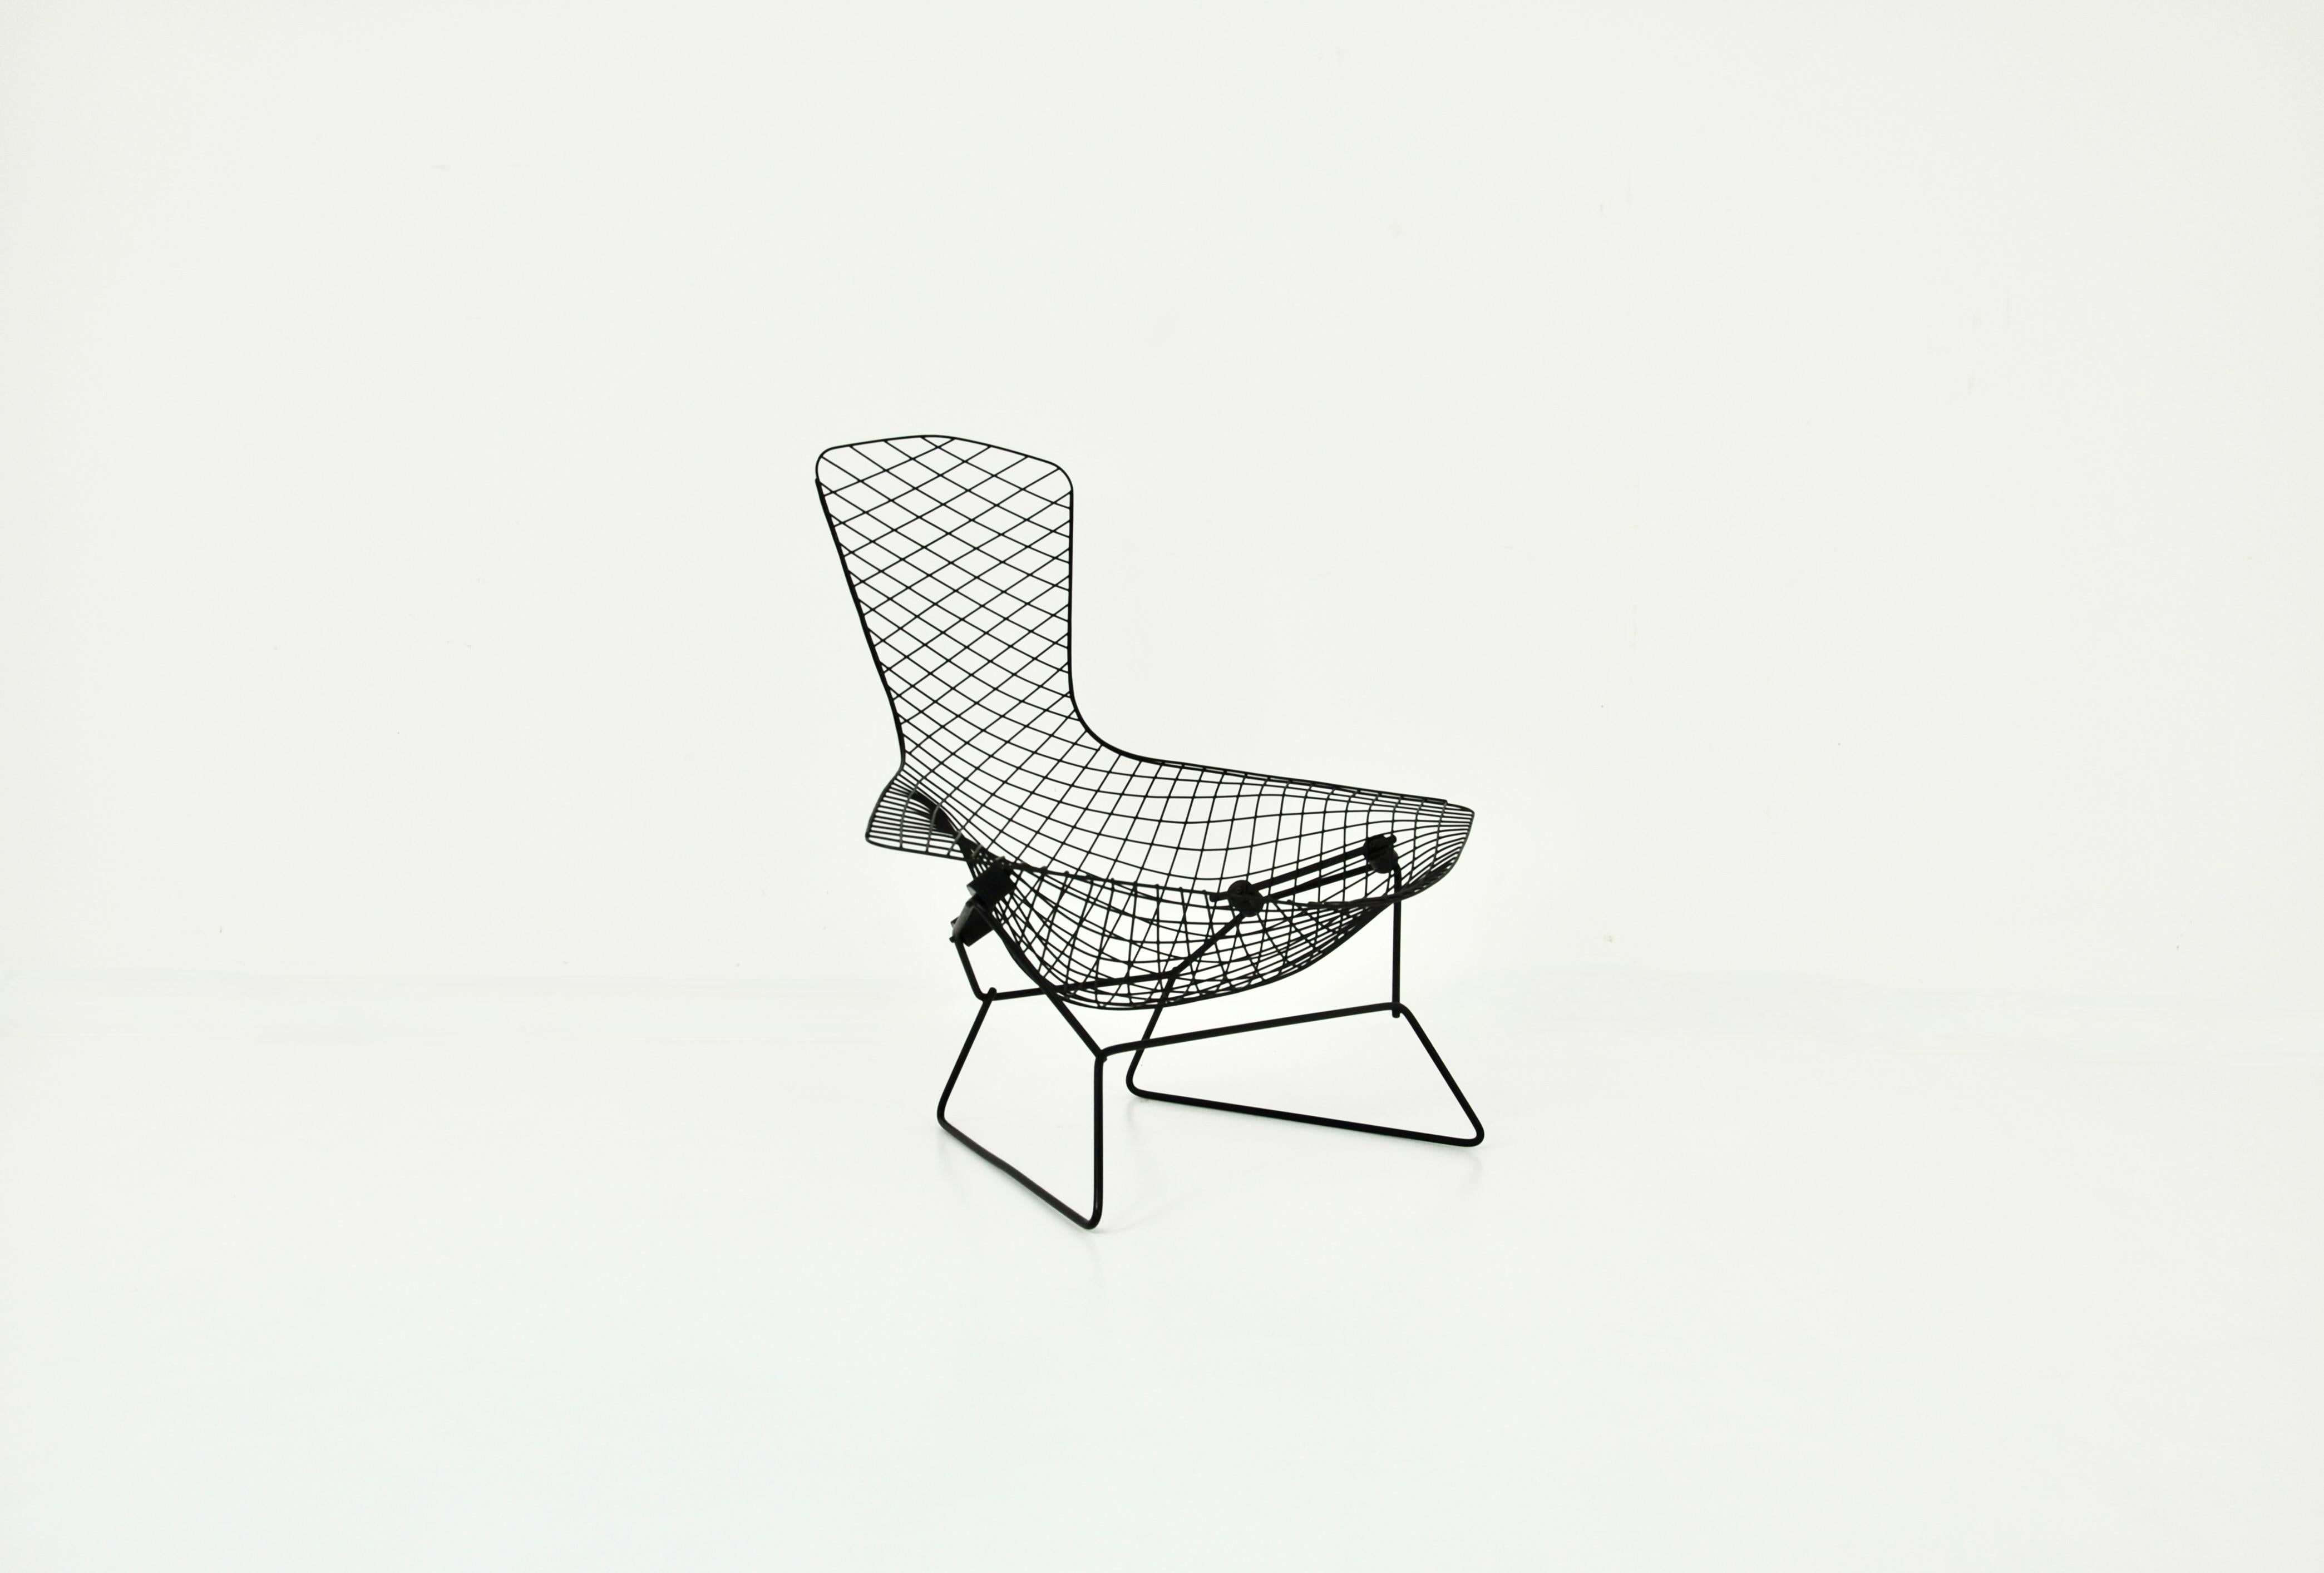 Black metal chair by Harry Bertoia. Model: Bird. Seat height: 22 cm. Wear due to time and age of the chair.